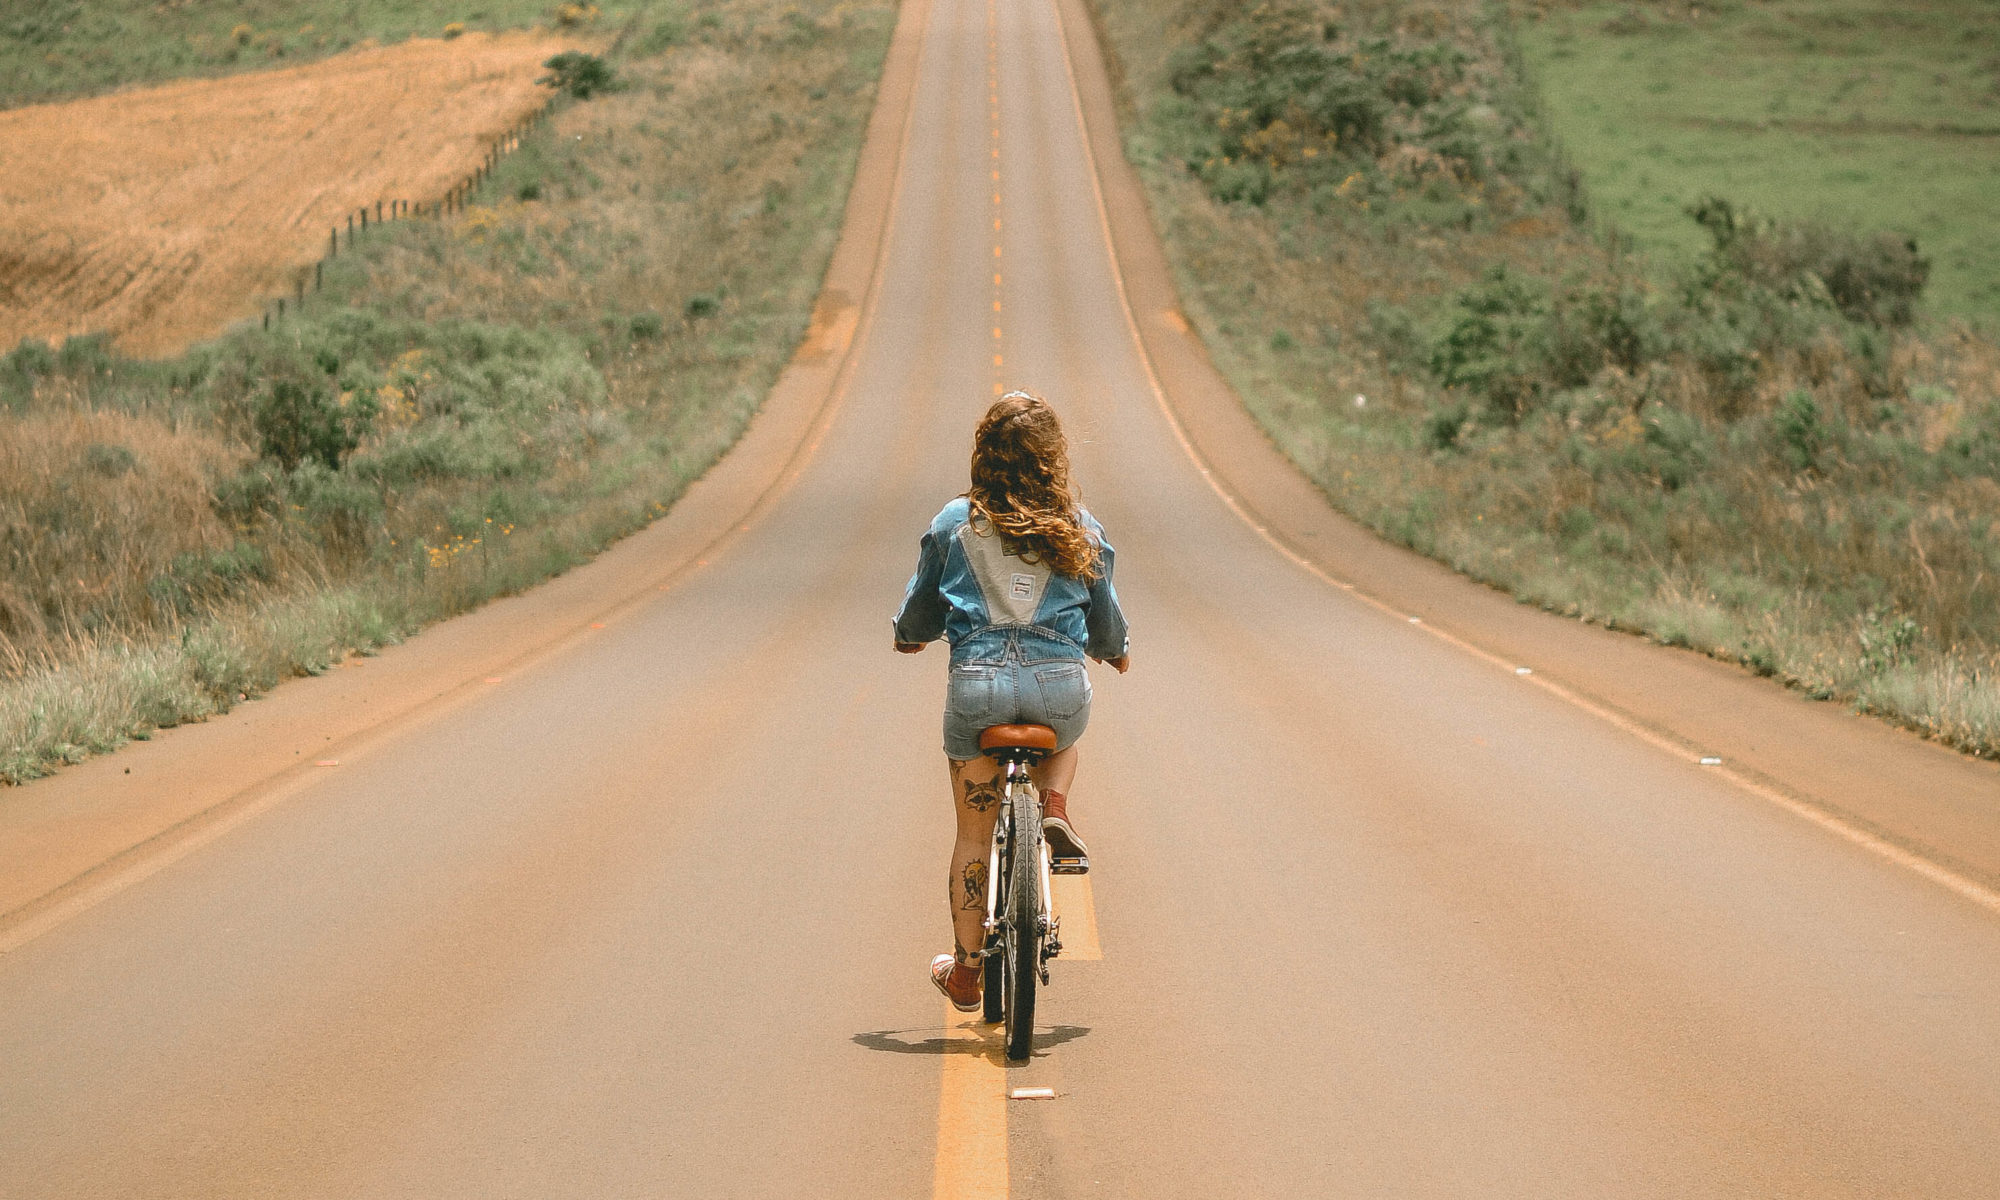 Girl riding bike in the middle of the road during day